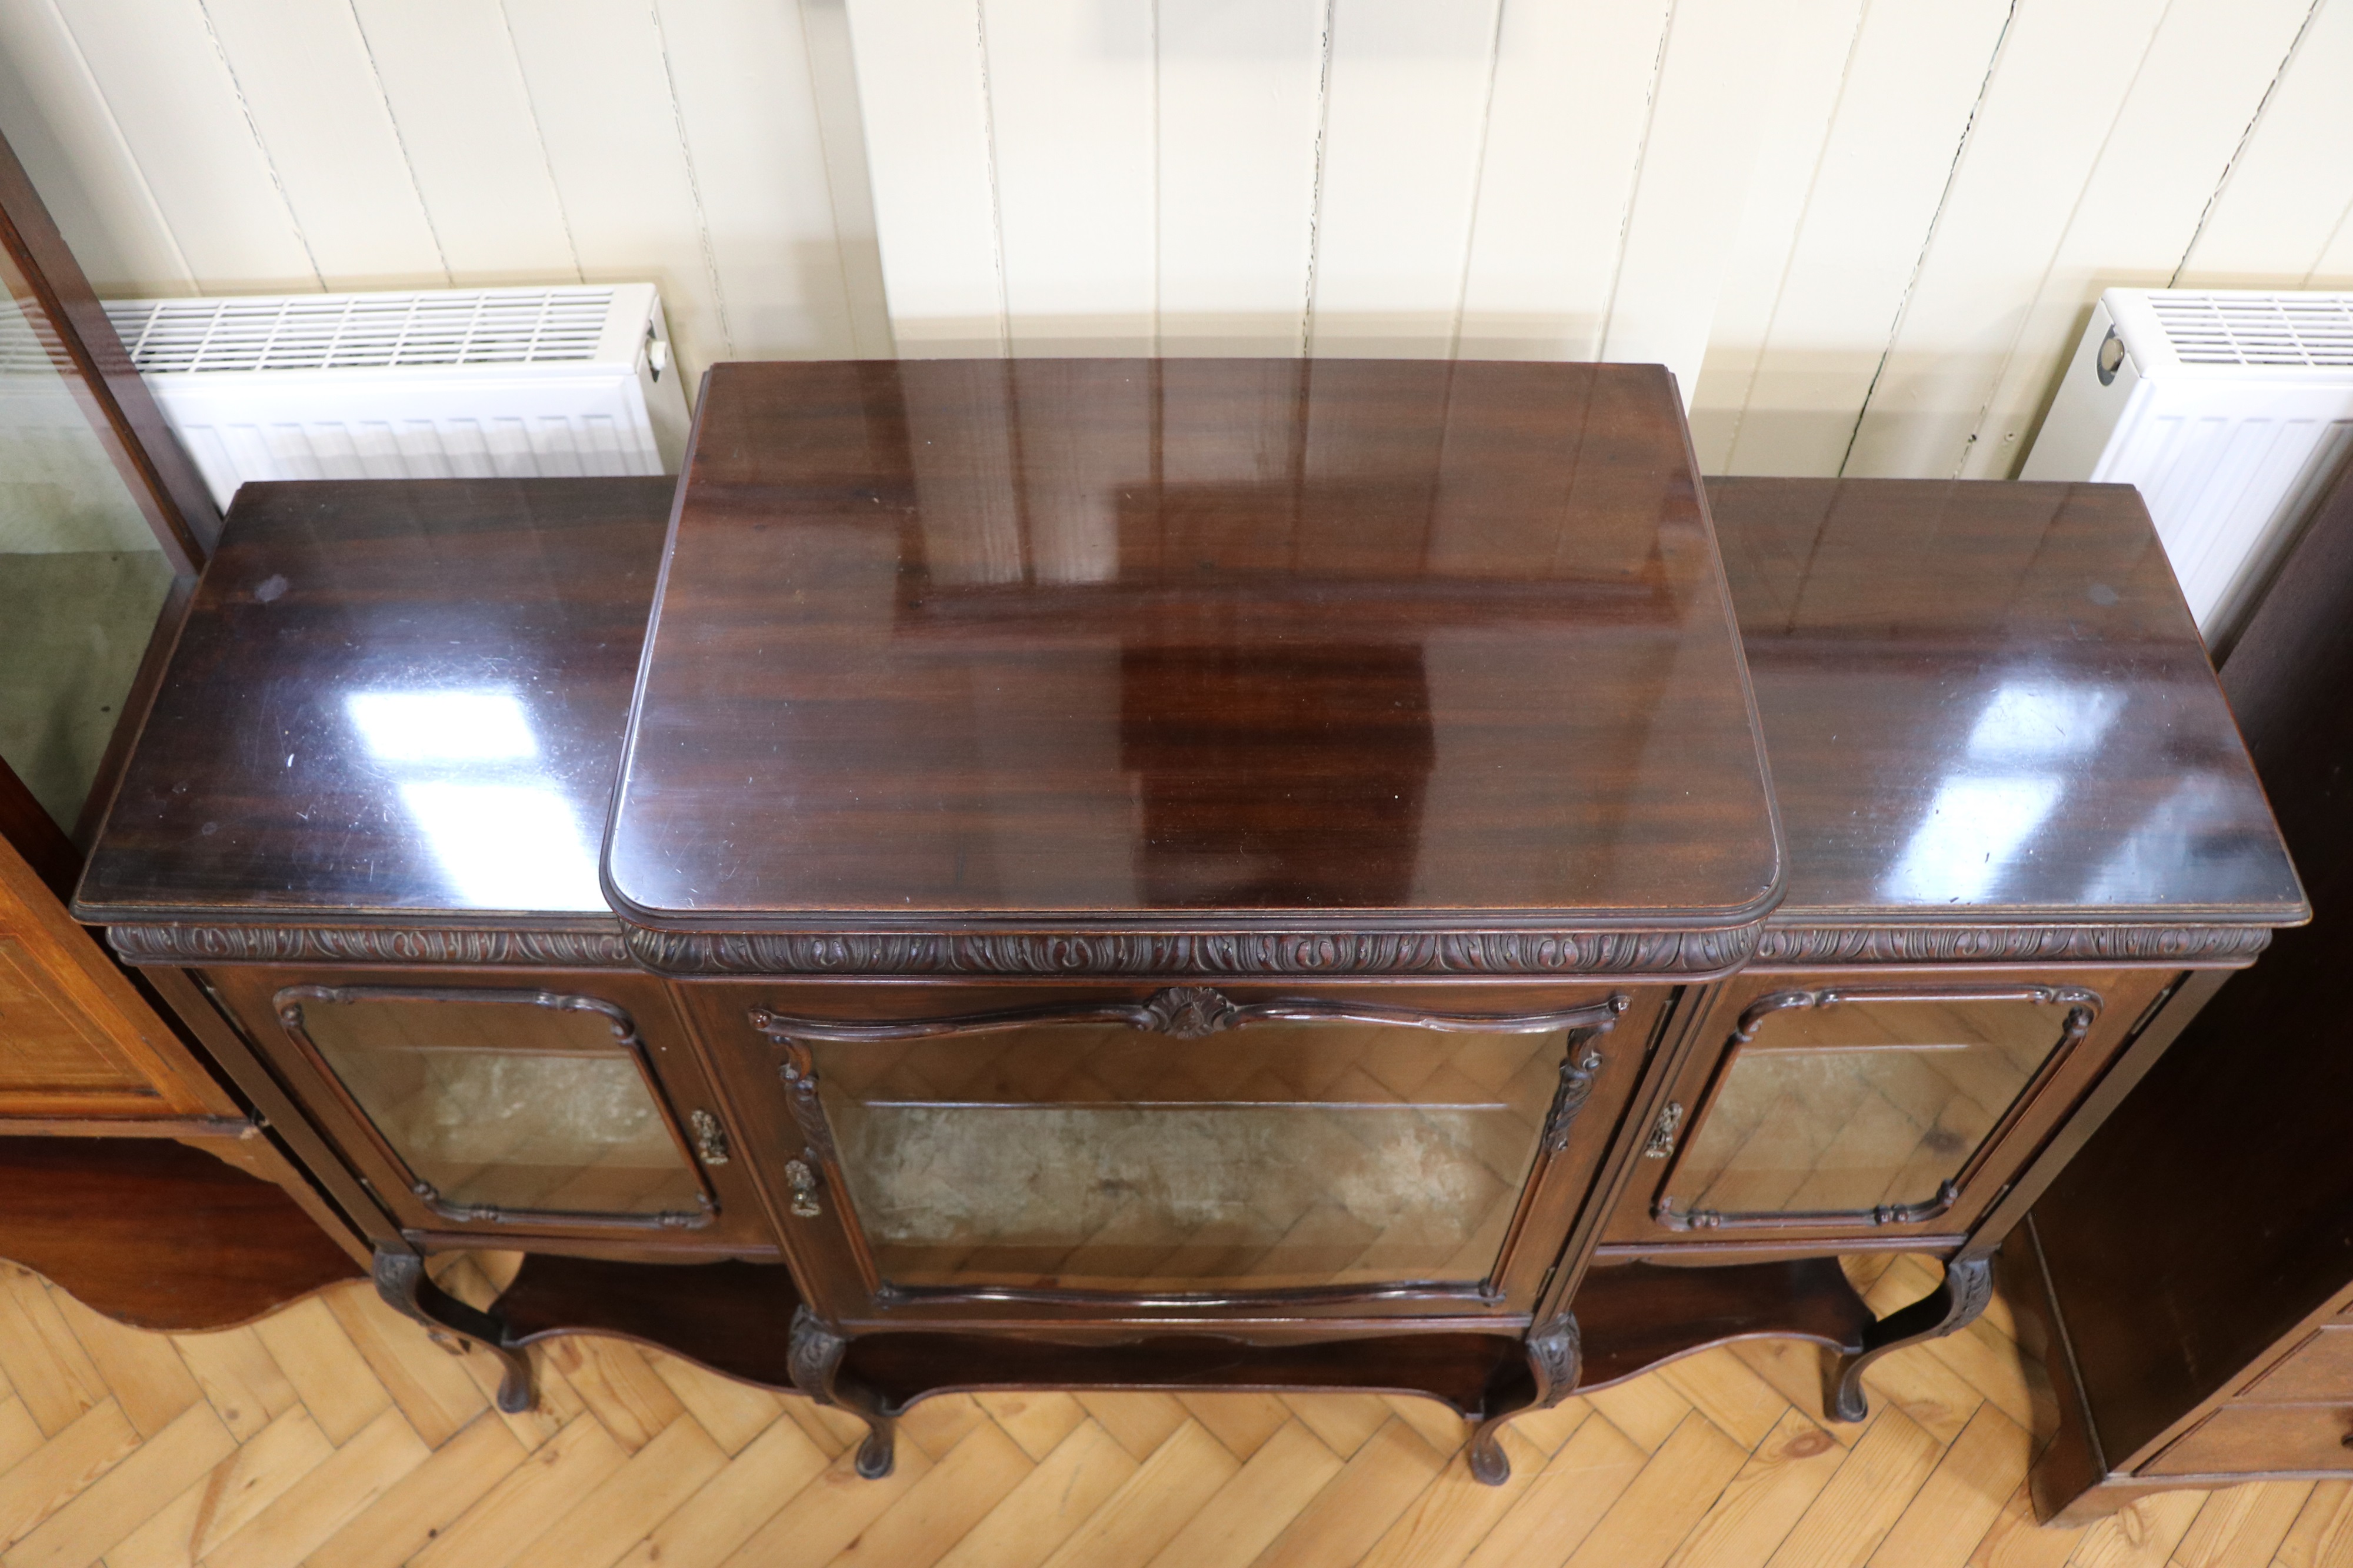 A Victorian Louis-style glazed mahogany break-front display cabinet, 138 cm x 43 cm x 106 cm - Image 5 of 5